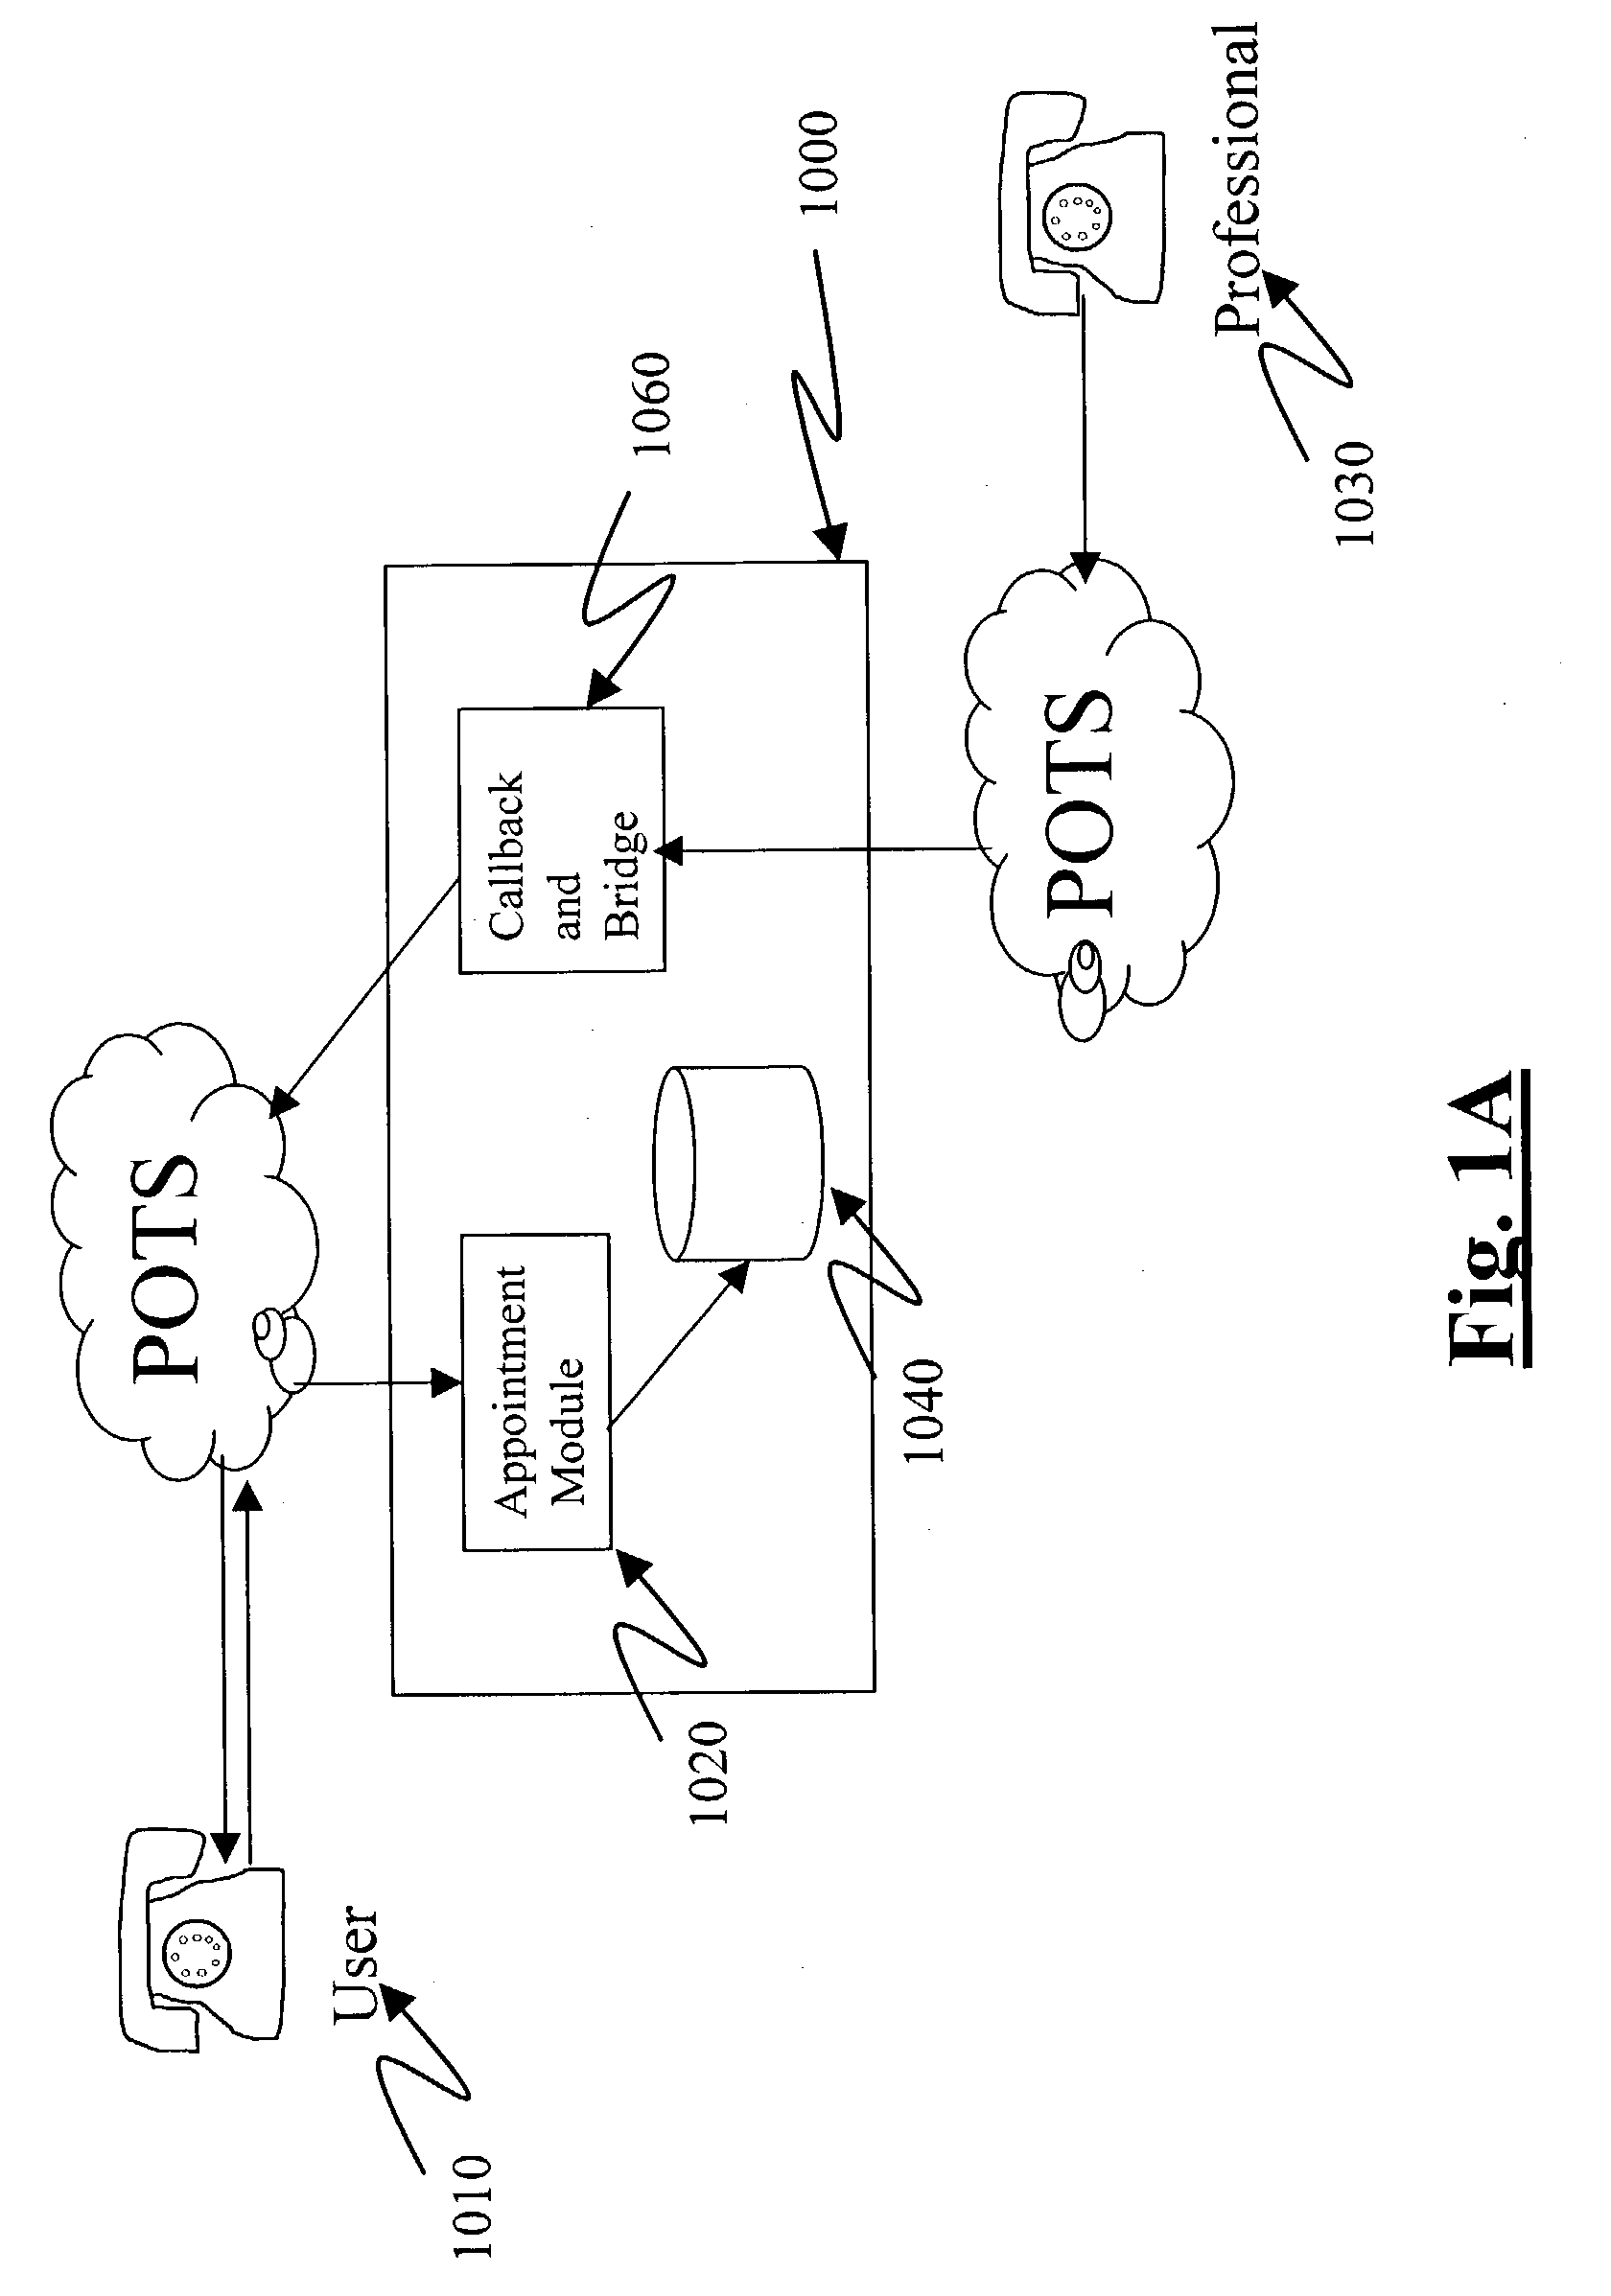 Telephone appointment processing system